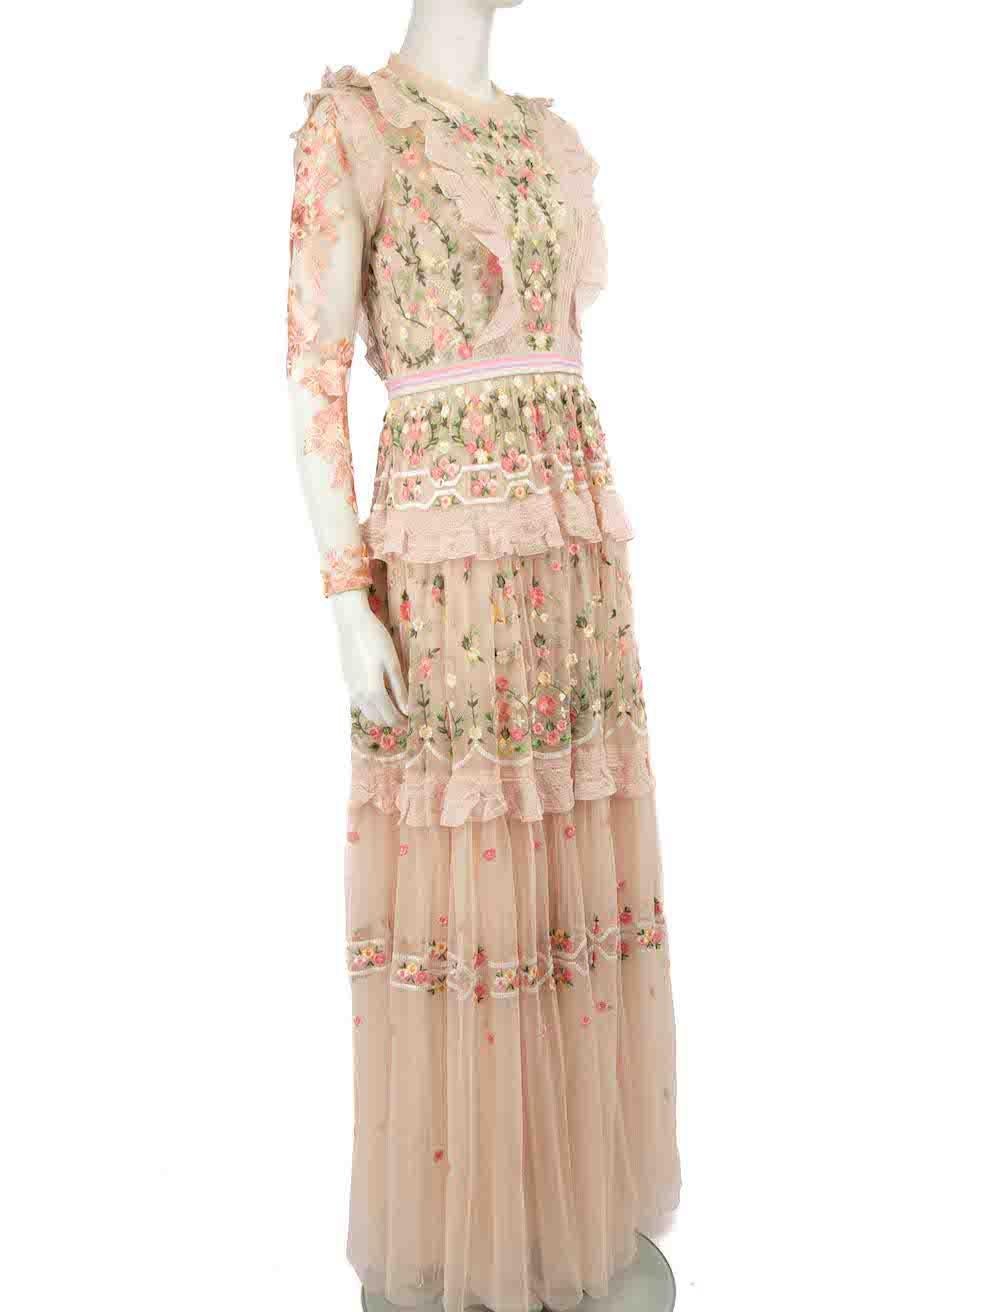 CONDITION is Very good. Minimal wear to dress is evident. Minimal wear to the front, back and left sleeve with loose threads to the embroidery on this used Needle & Thread designer resale item.
 
 
 
 Details
 
 
 Pink
 
 Synthetic
 
 Maxi dress
 
